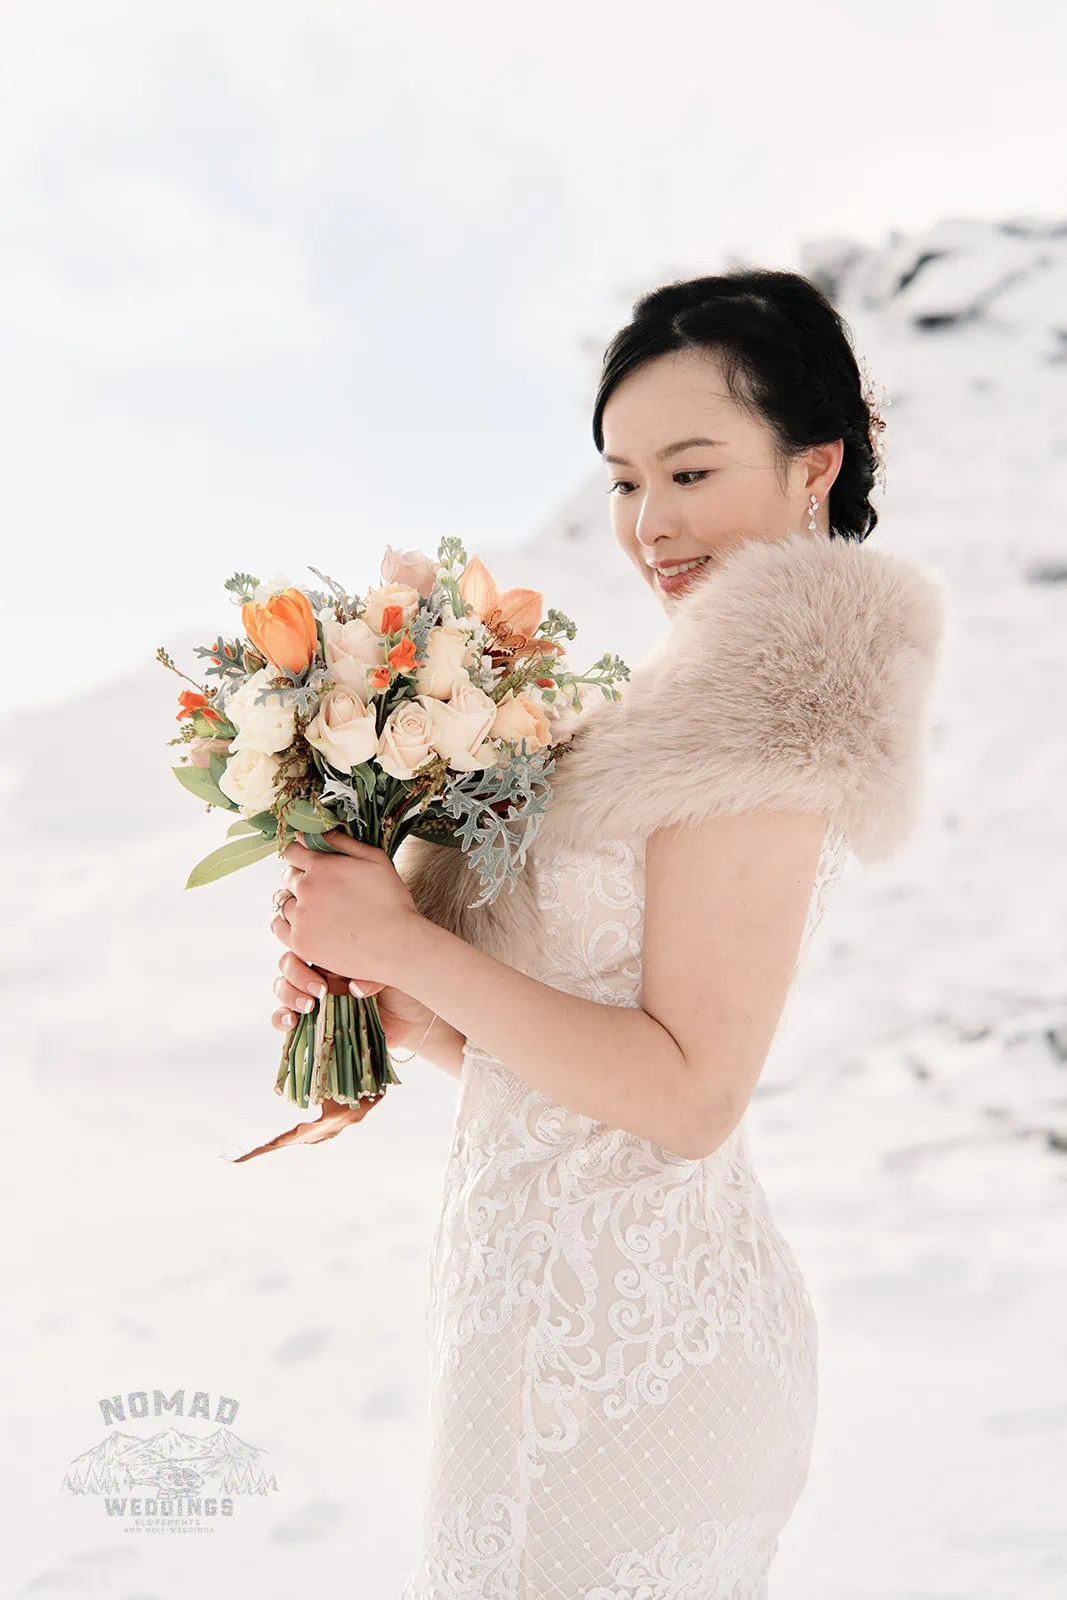 A snow-filled pre-wedding shoot in Queenstown, New Zealand, featuring bride Joanna holding a bouquet.